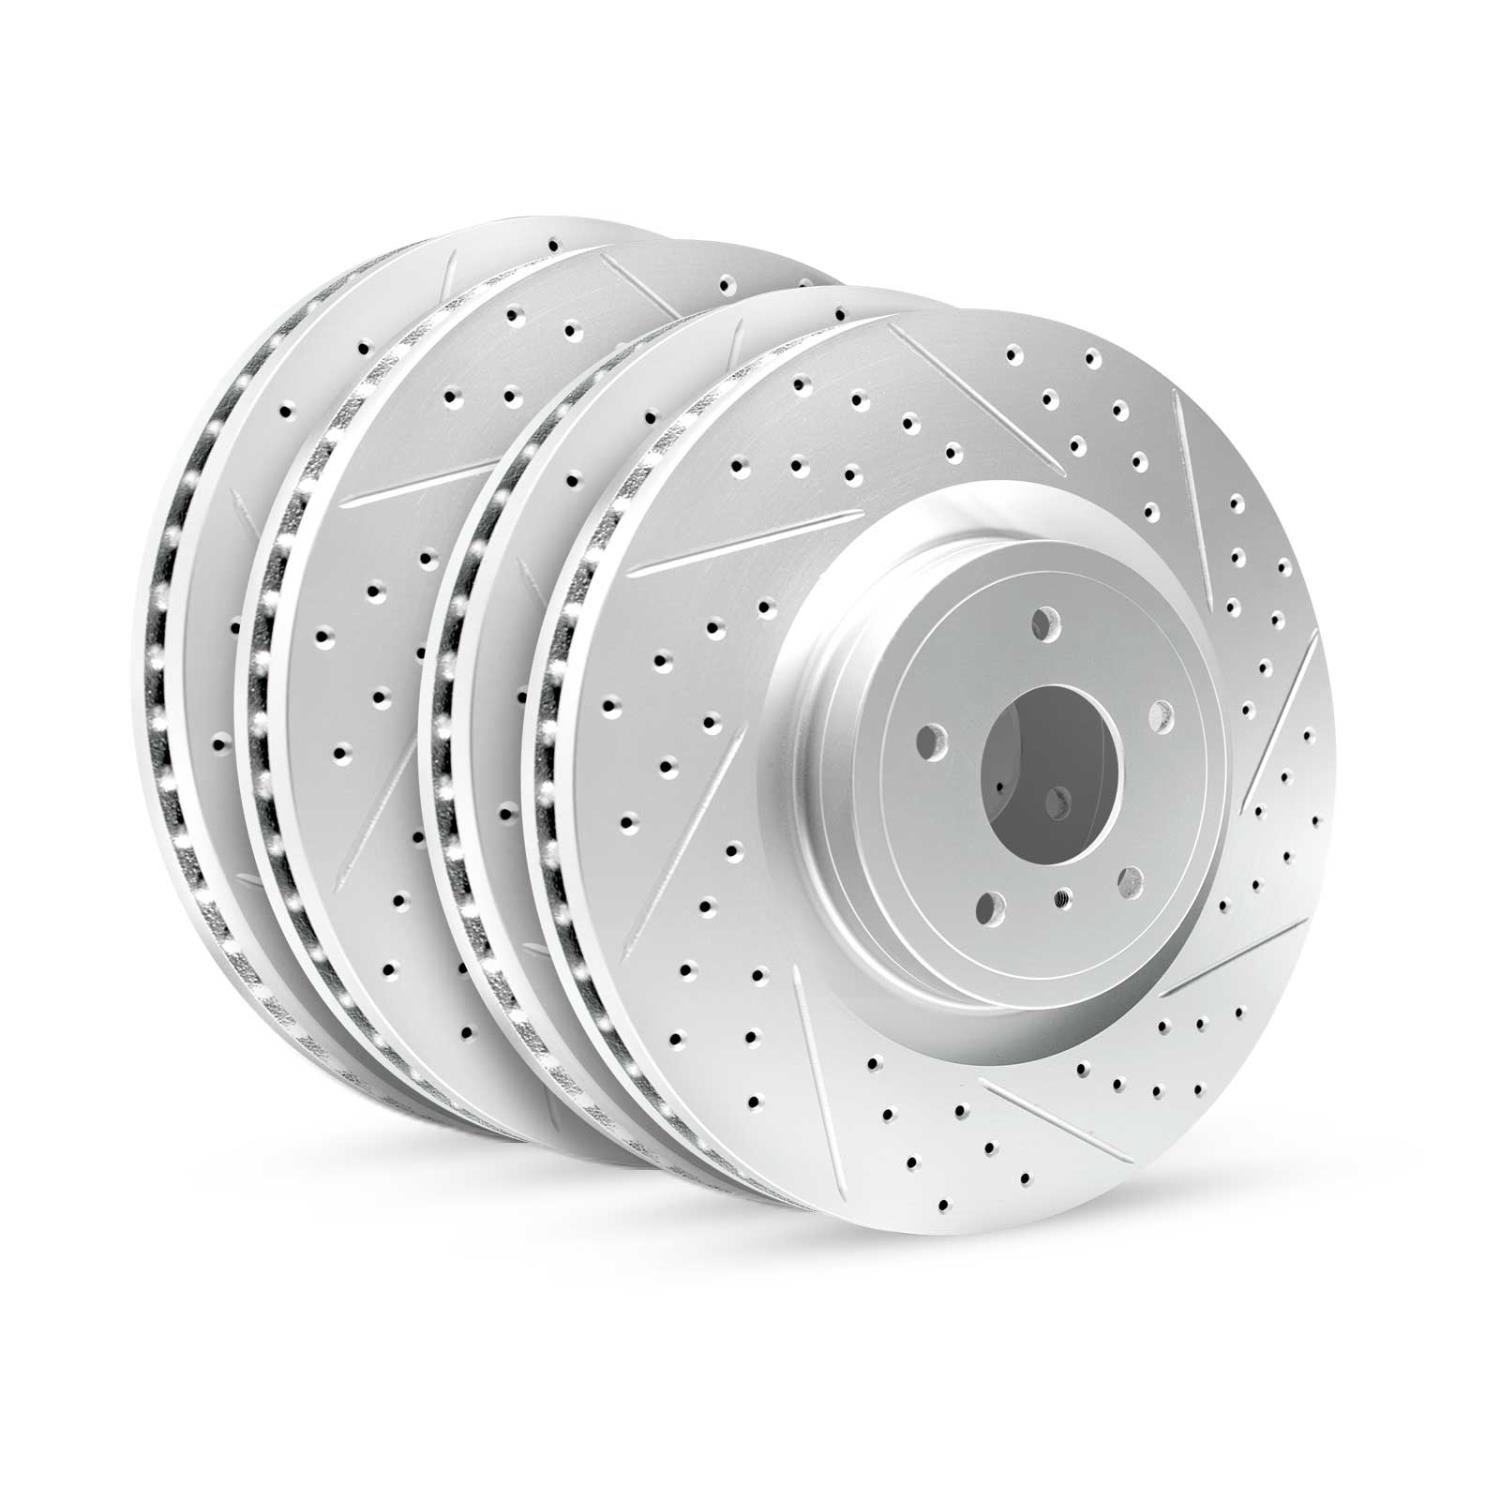 GEO-Carbon Drilled/Slotted Rotors, 1997-2002 Ford/Mazda,